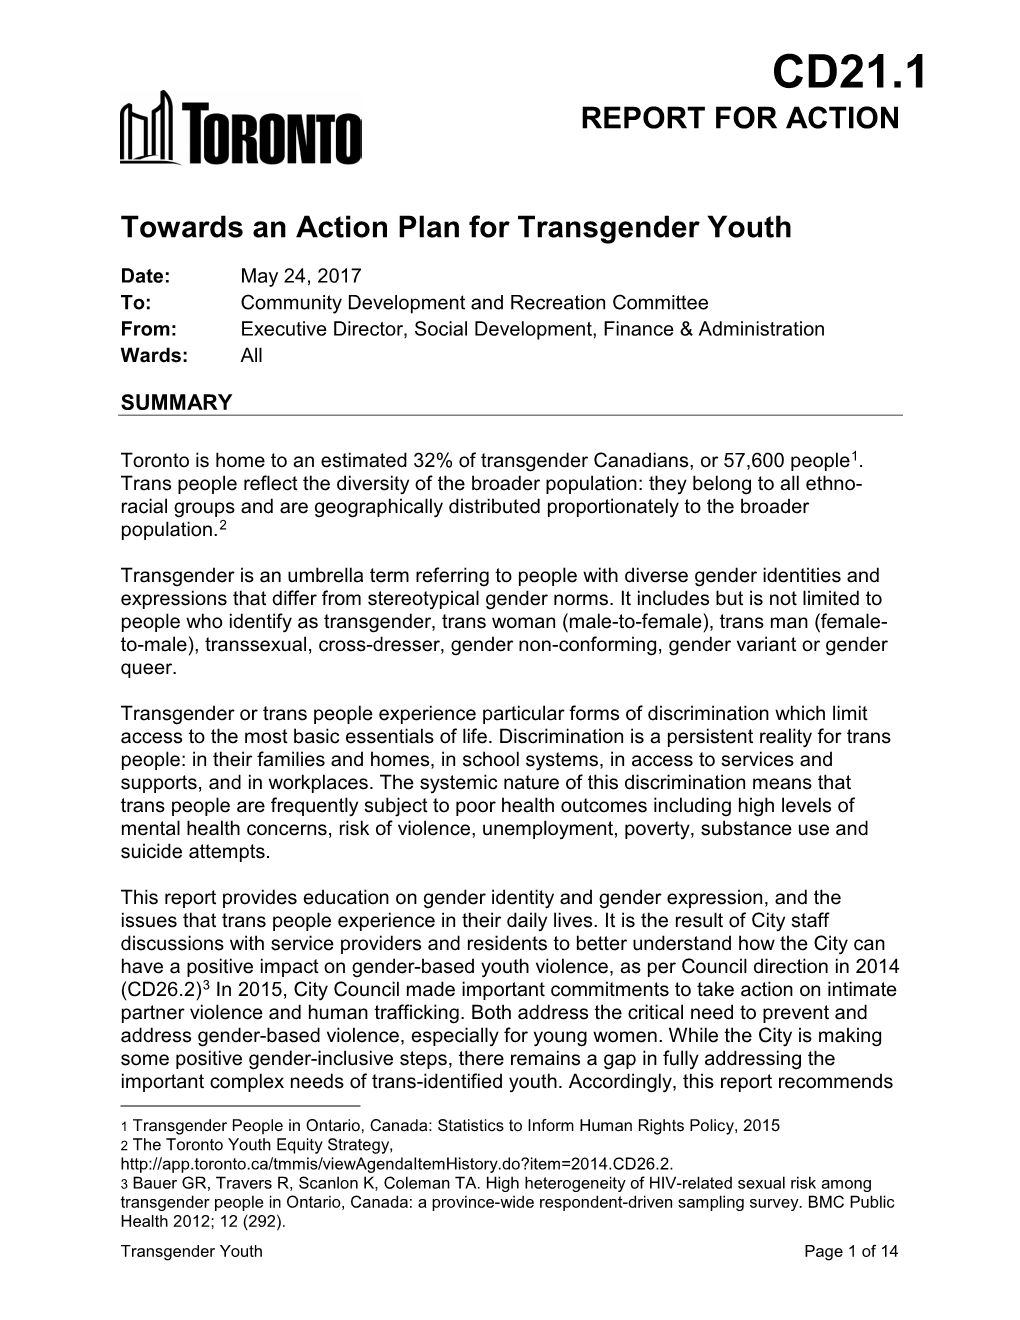 Towards an Action Plan for Transgender Youth